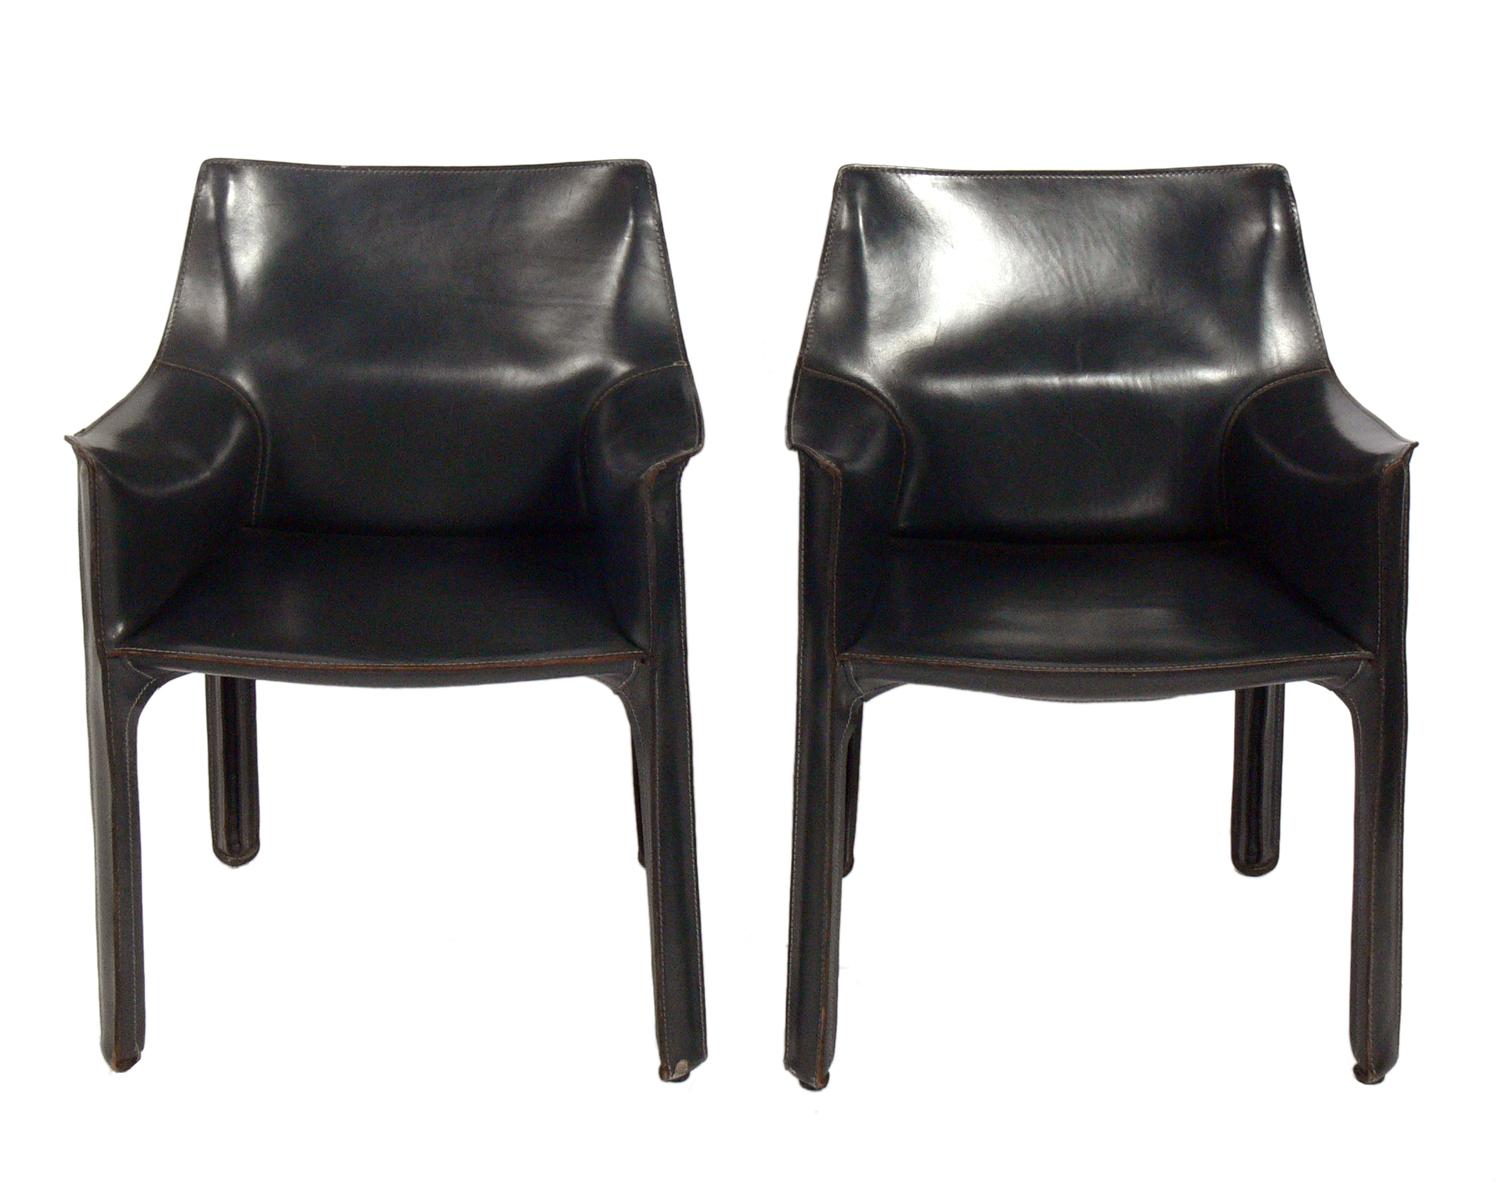 Pair of charcoal gray leather cab chairs, designed by Mario Bellini for Cassina, circa 1980s.